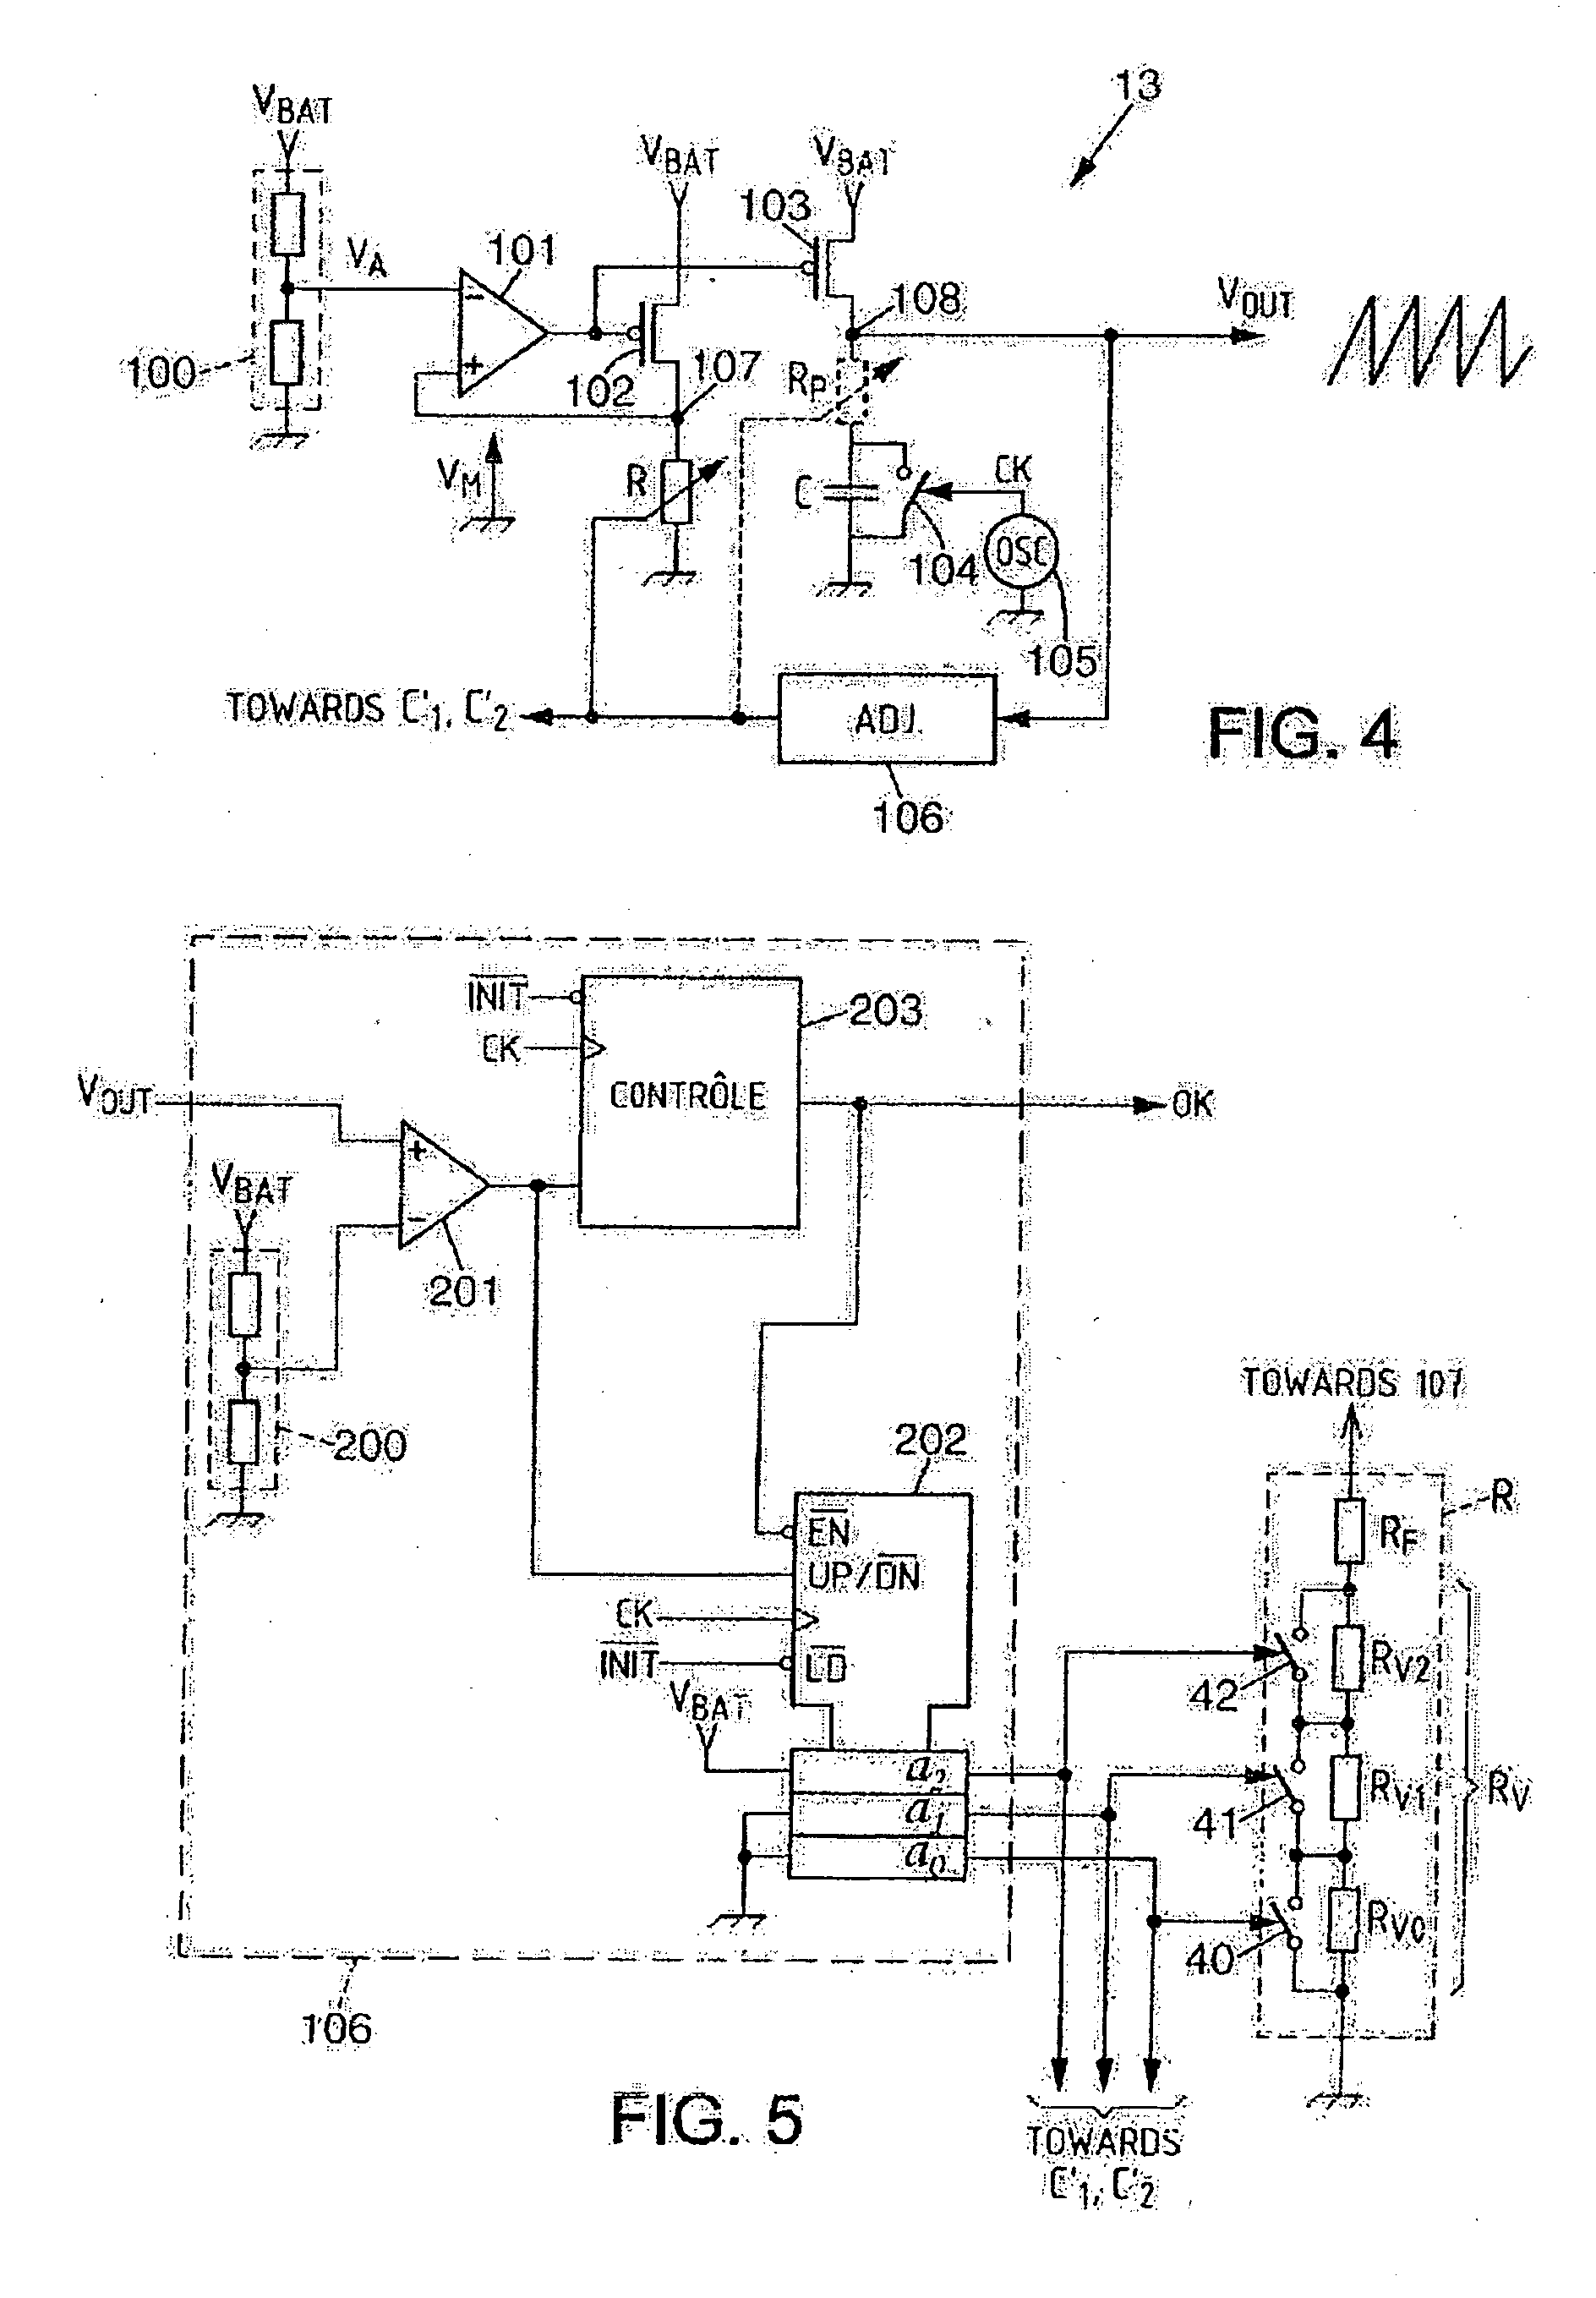 Auto-adjustment of RC cells within a circuit